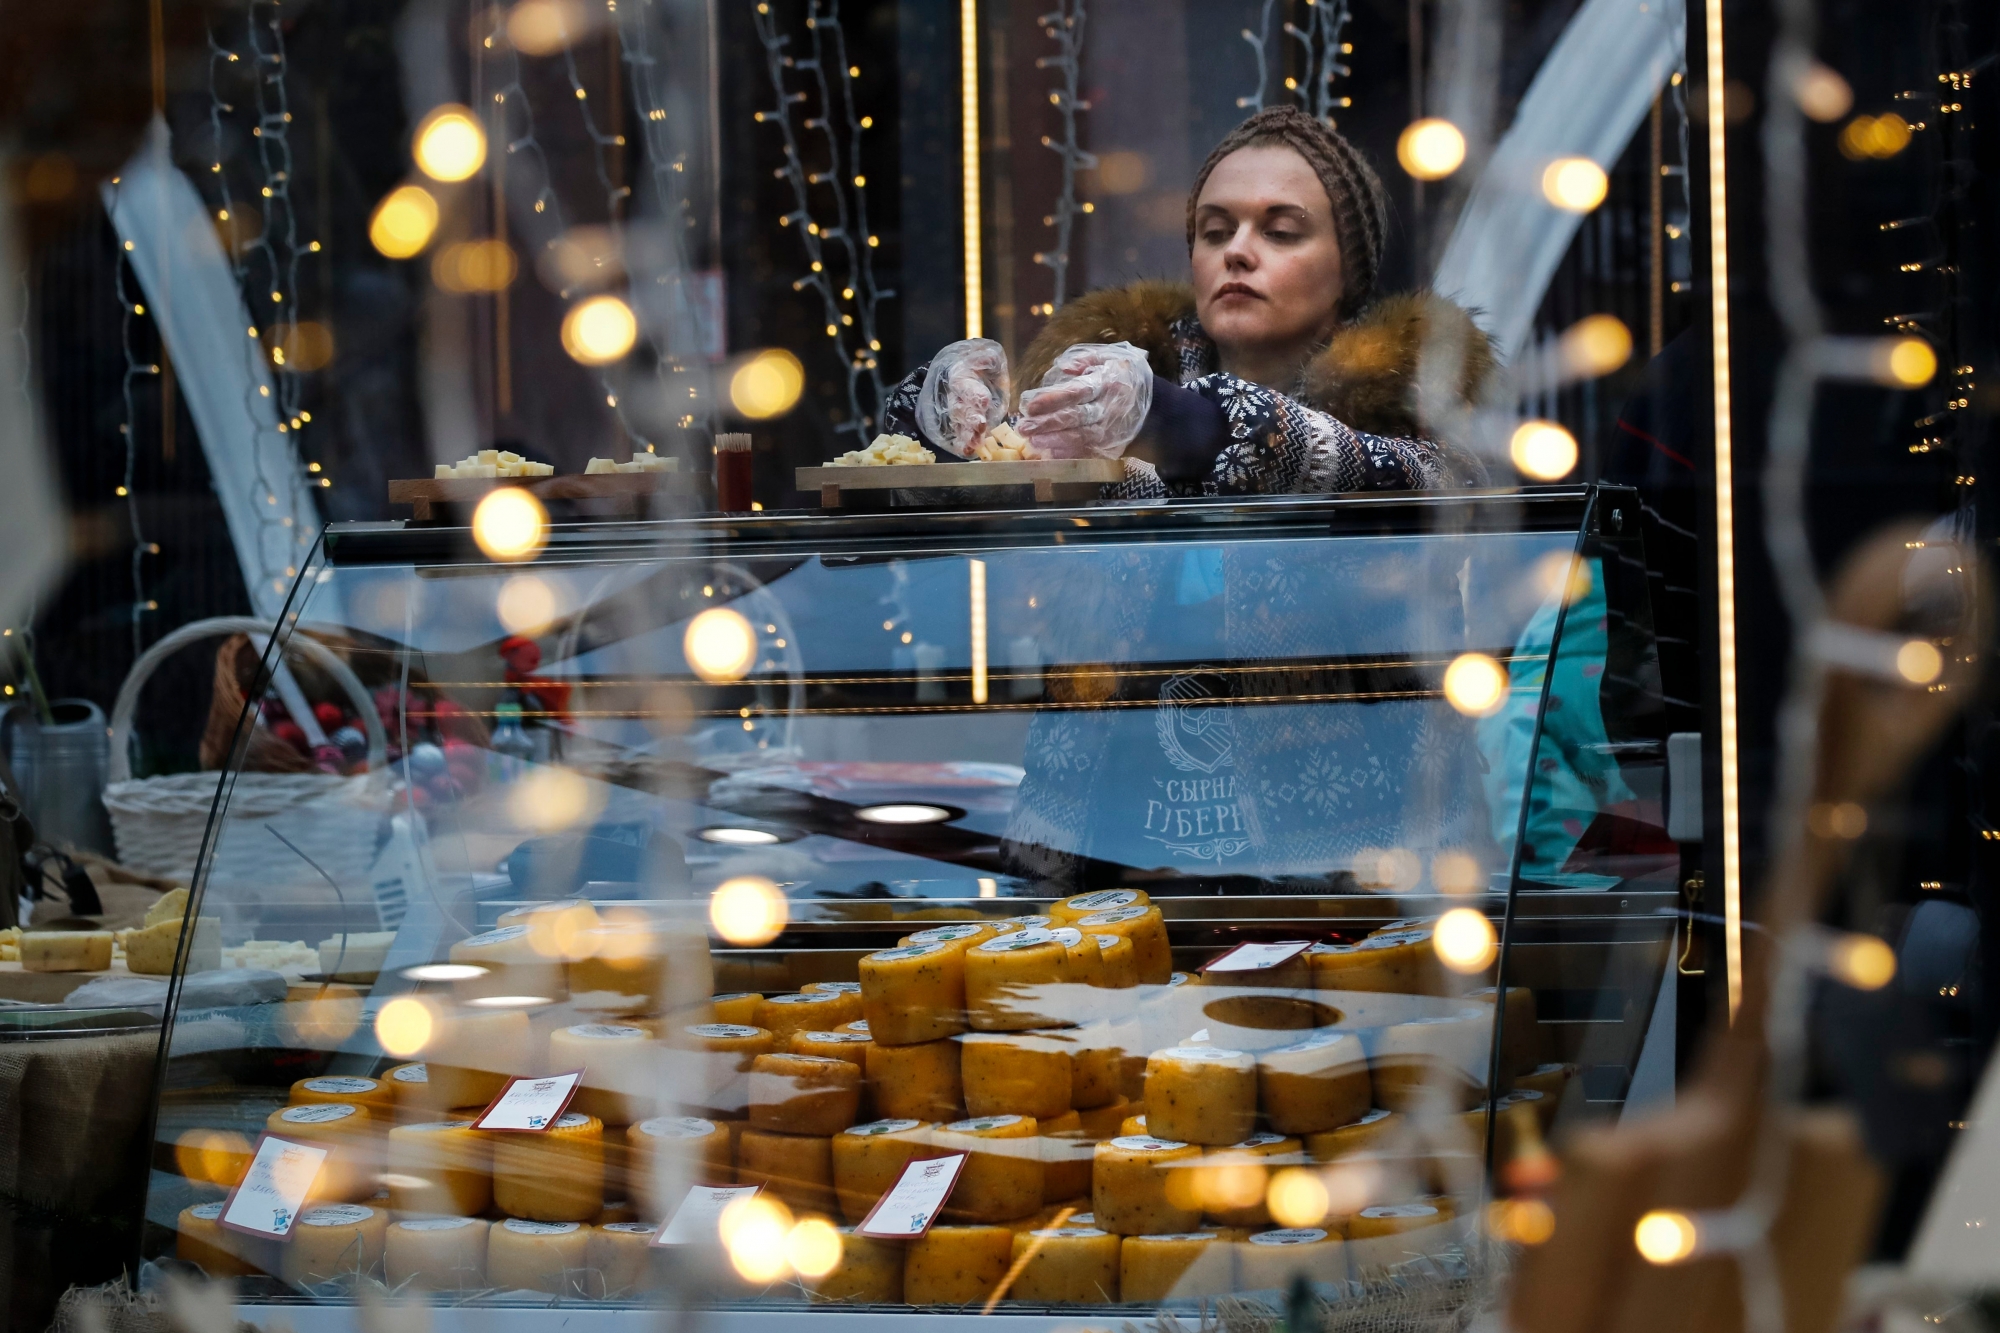 A saleswoman stands behind a counter with Russian-made cheese in downtown Moscow, Russia on Friday, Dec. 30, 2016. (AP Photo/Alexander Zemlianichenko) RUSSLAND MOSKAU